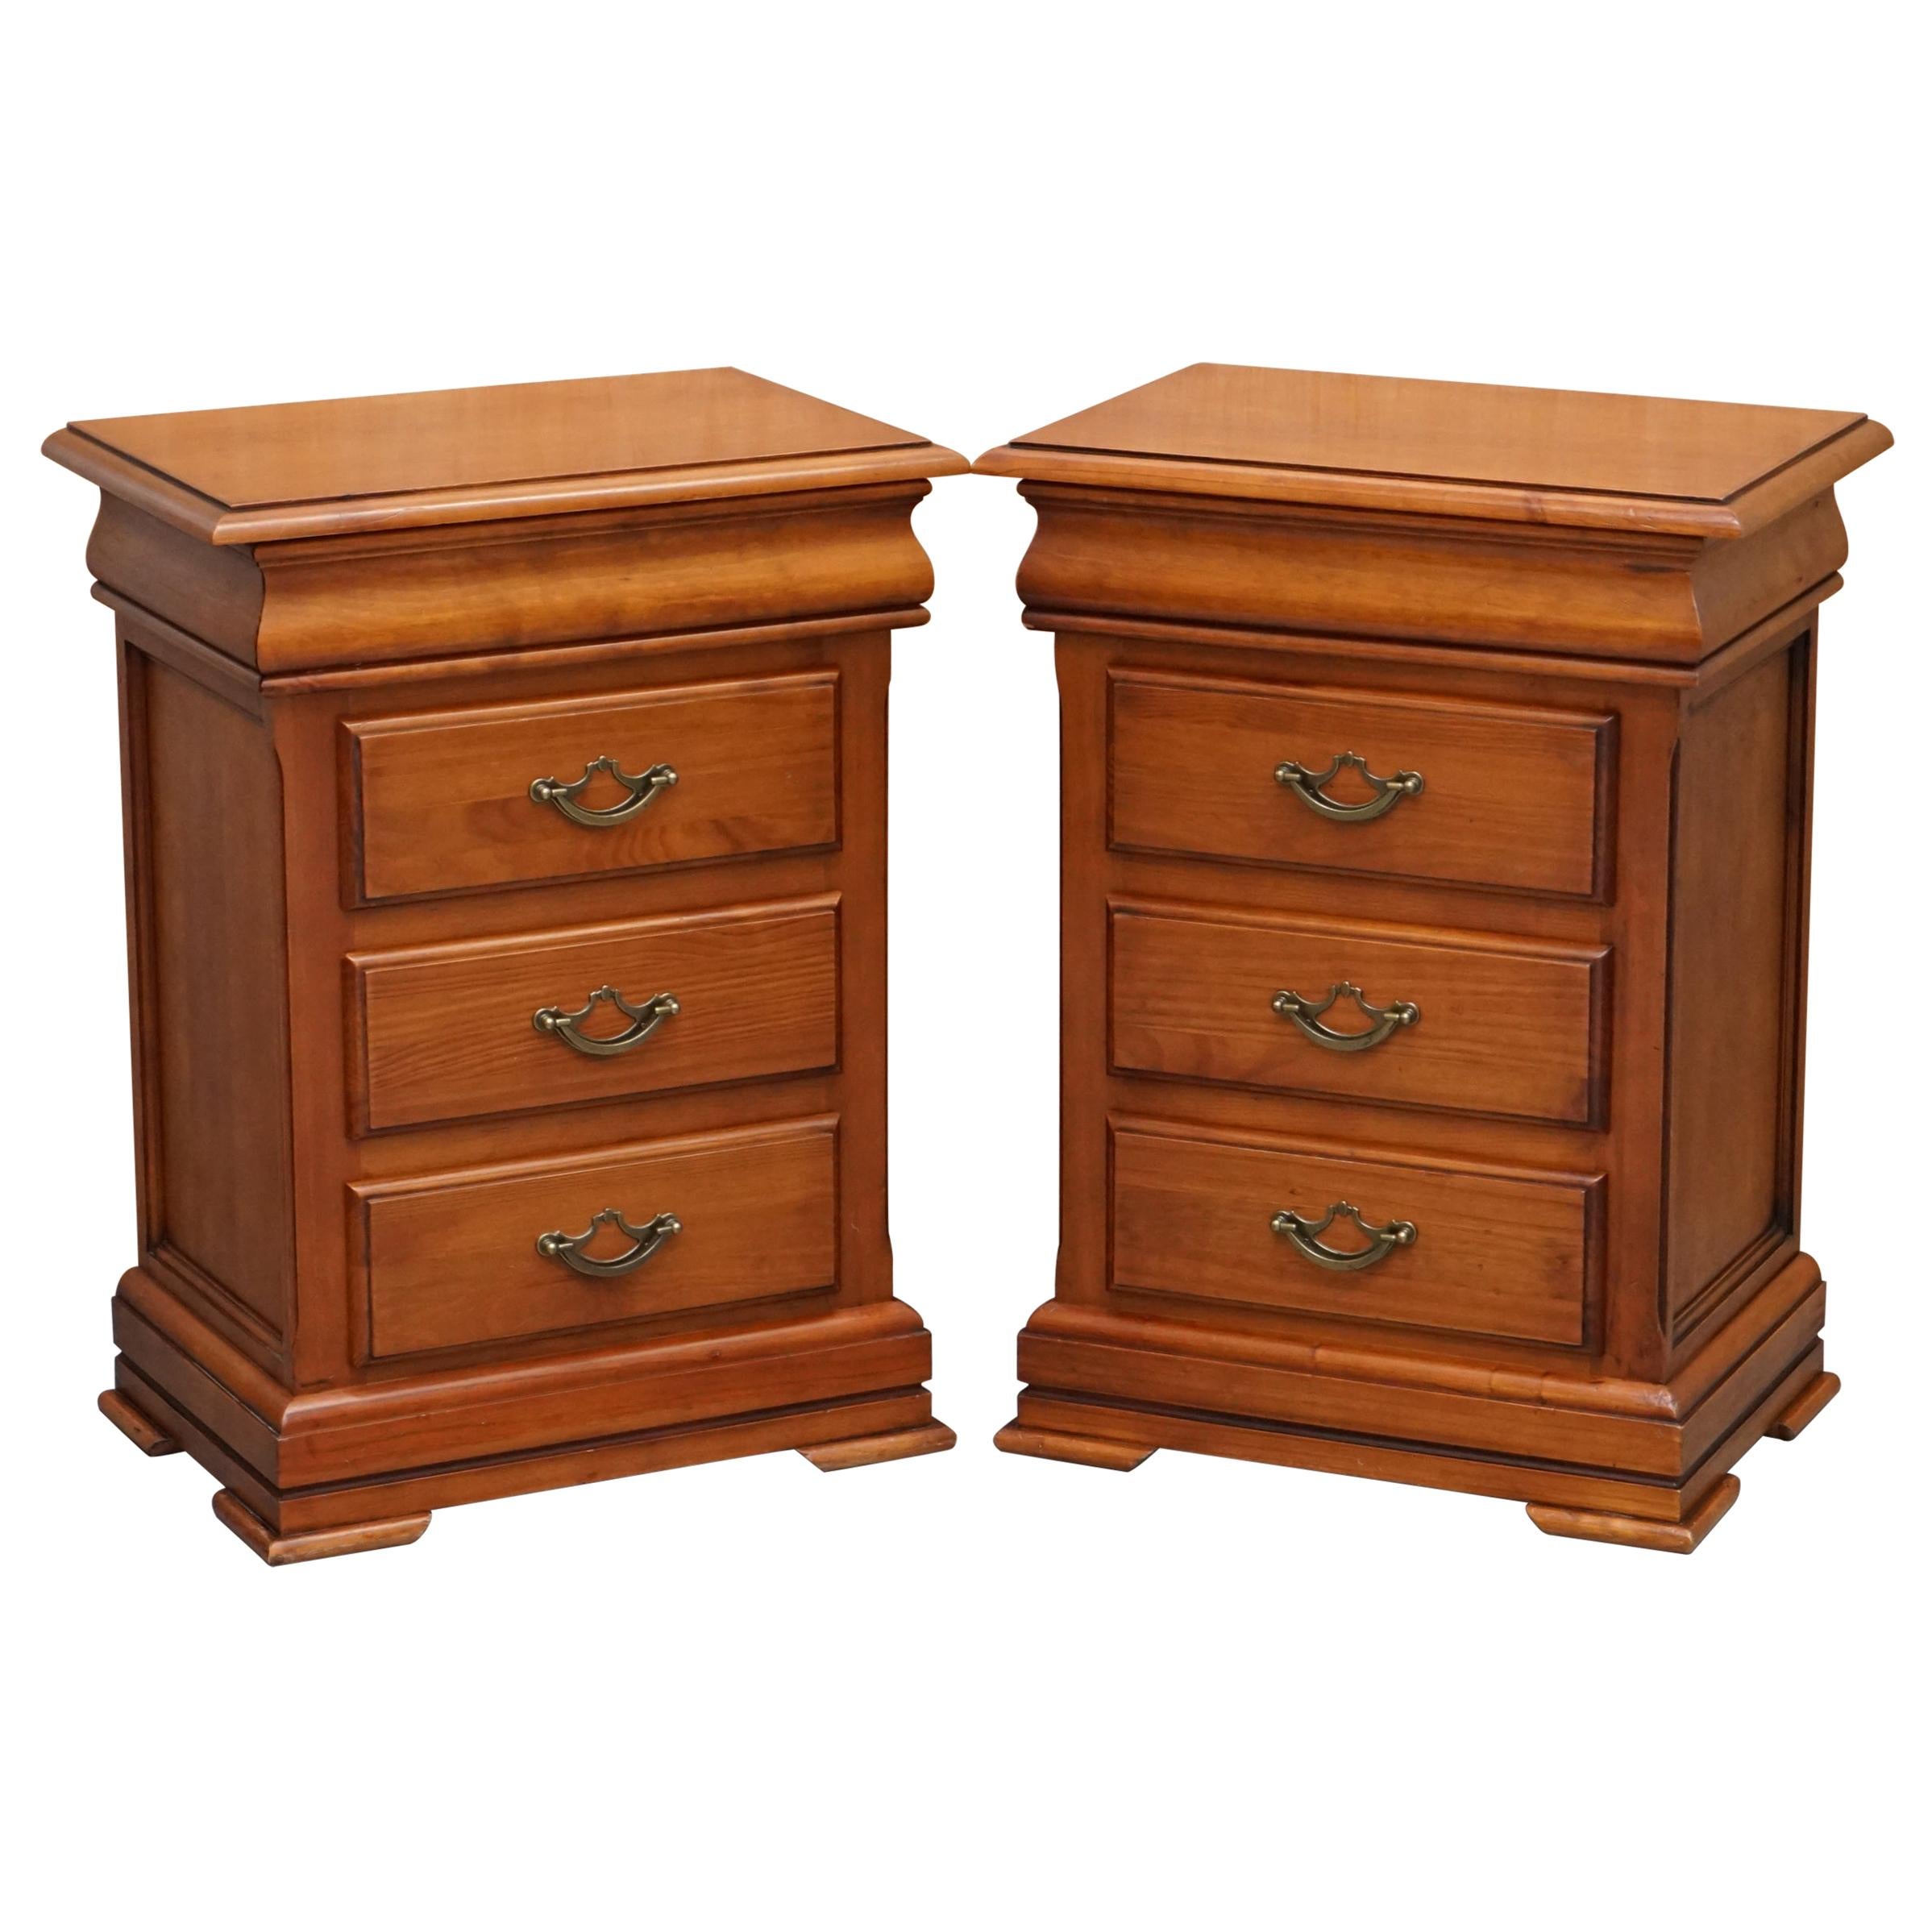 Pair of Bedside Table Drawers with Four Drawers Each, Cherry Color Wood